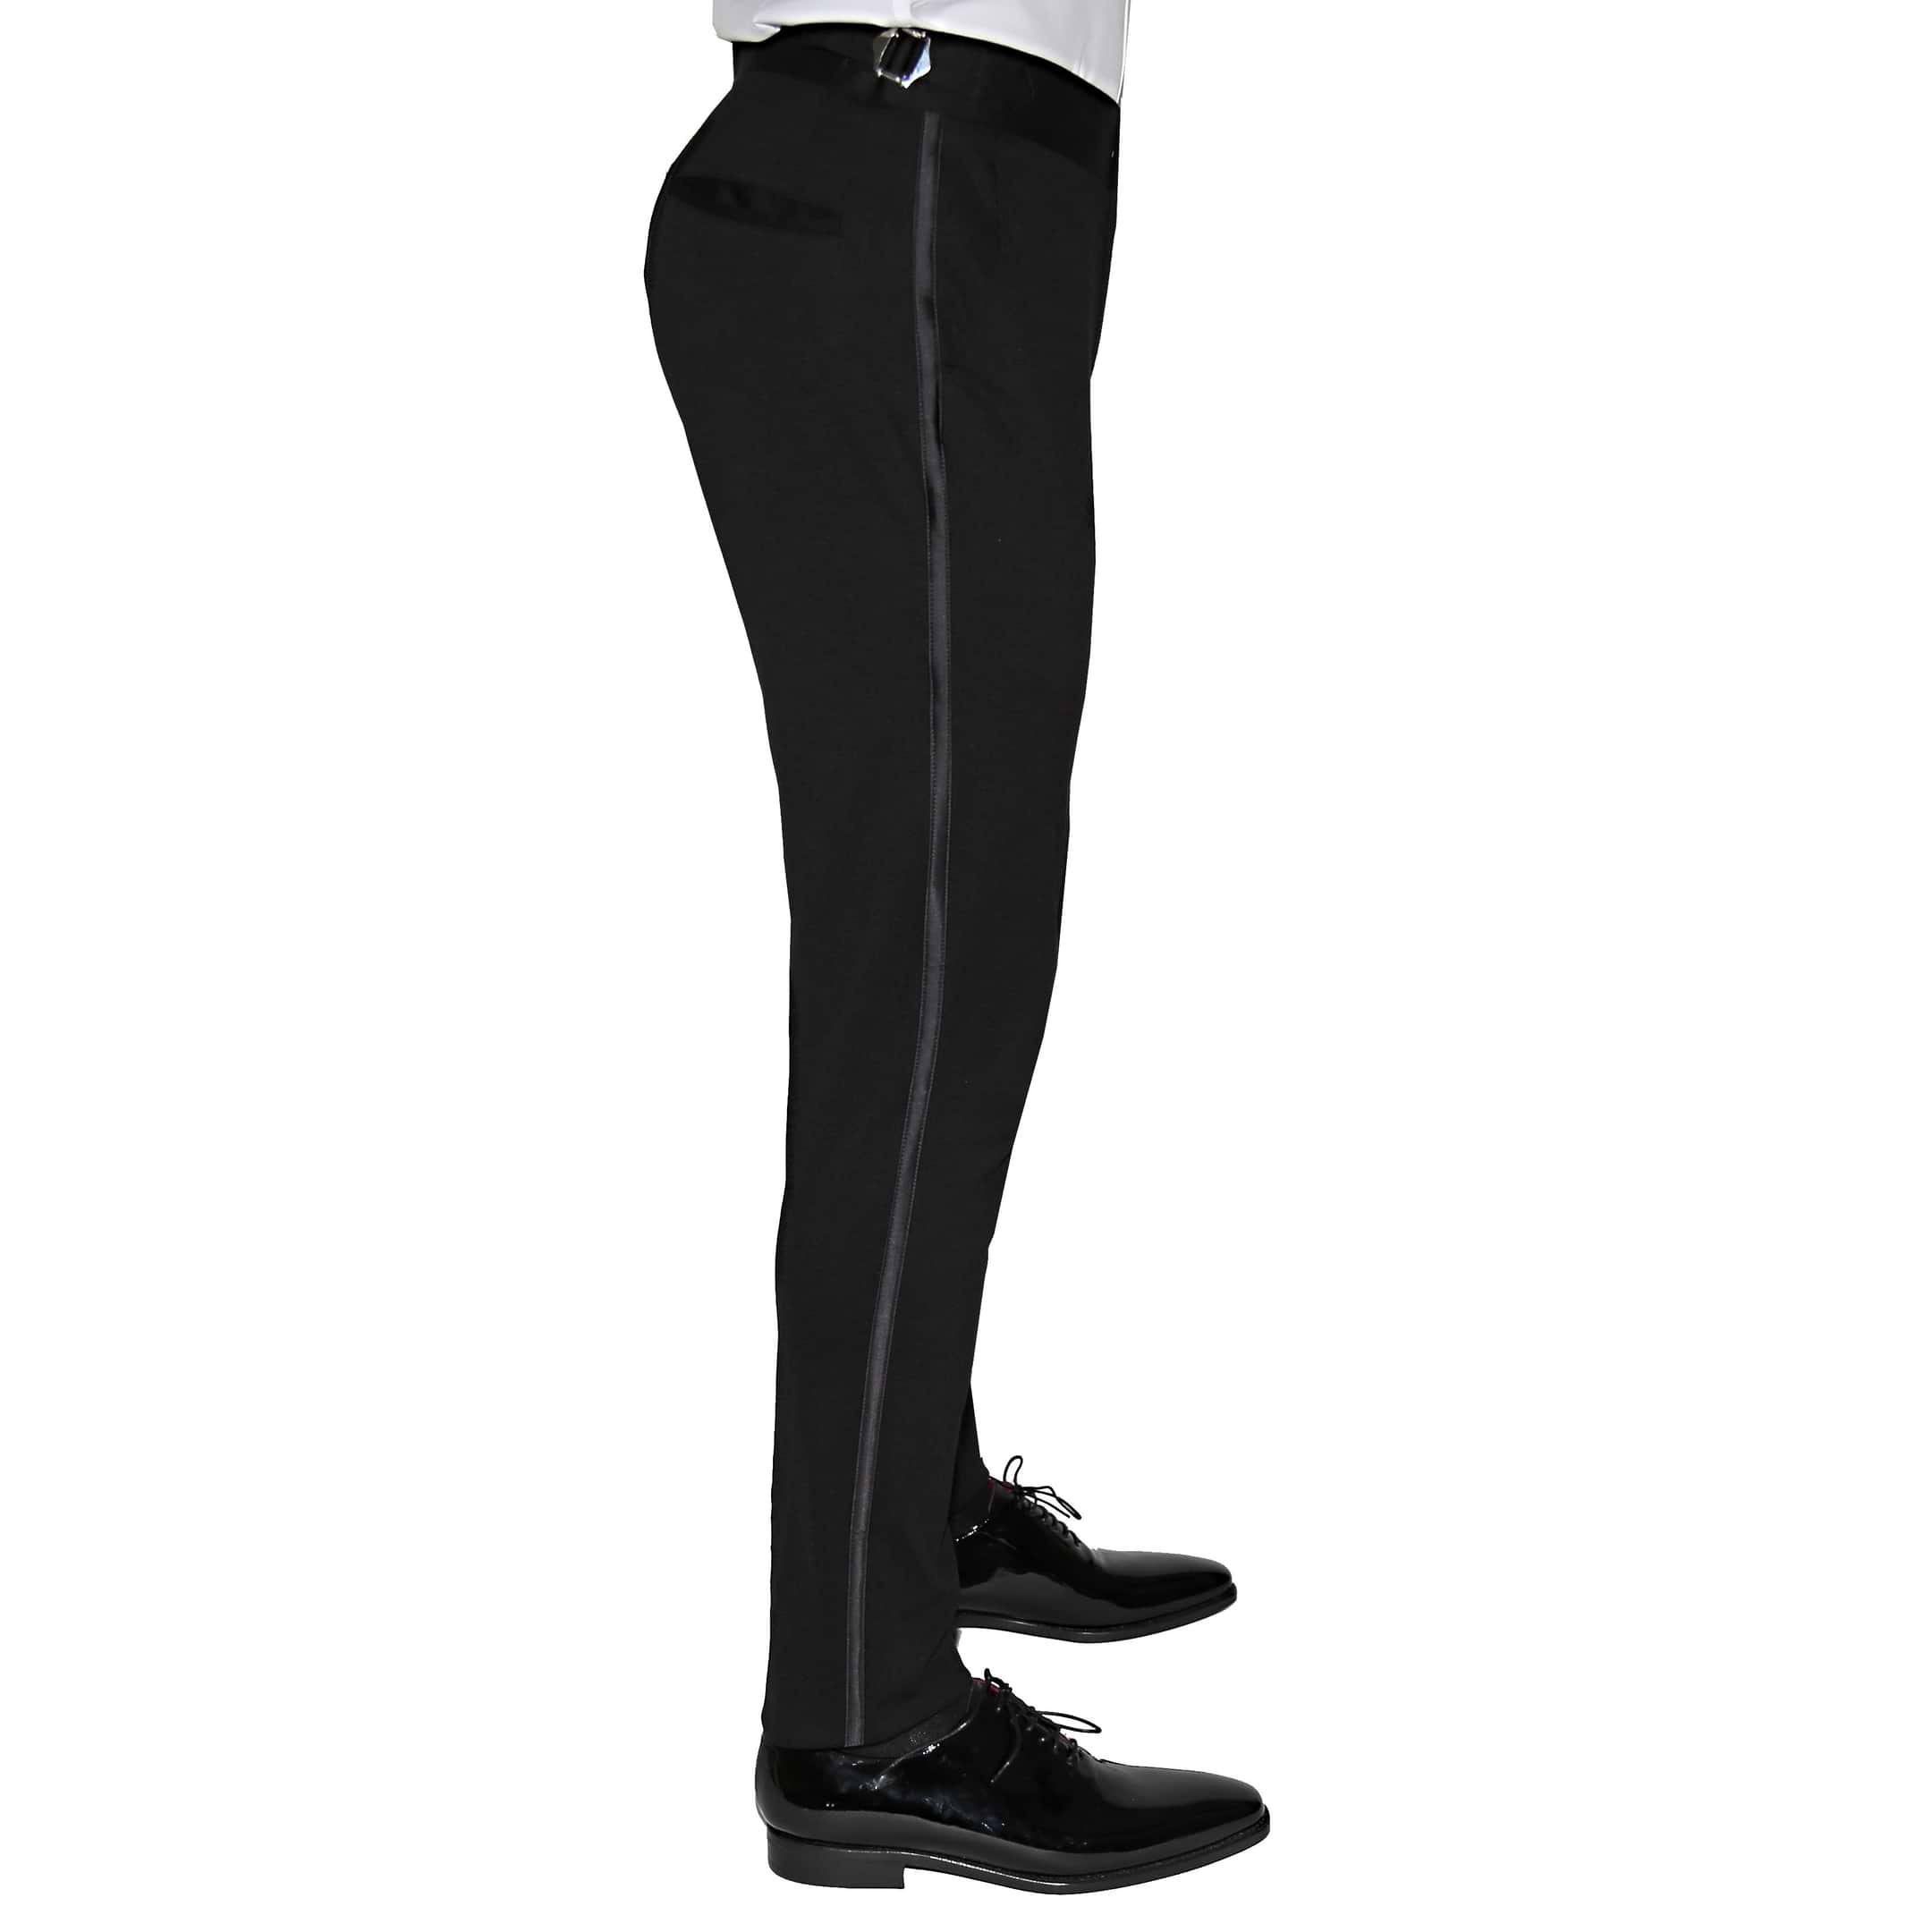 Sport Legging Pant with built in Girdle - Sport and Casual pants with  built-in girdle - Productos de Colombia.com